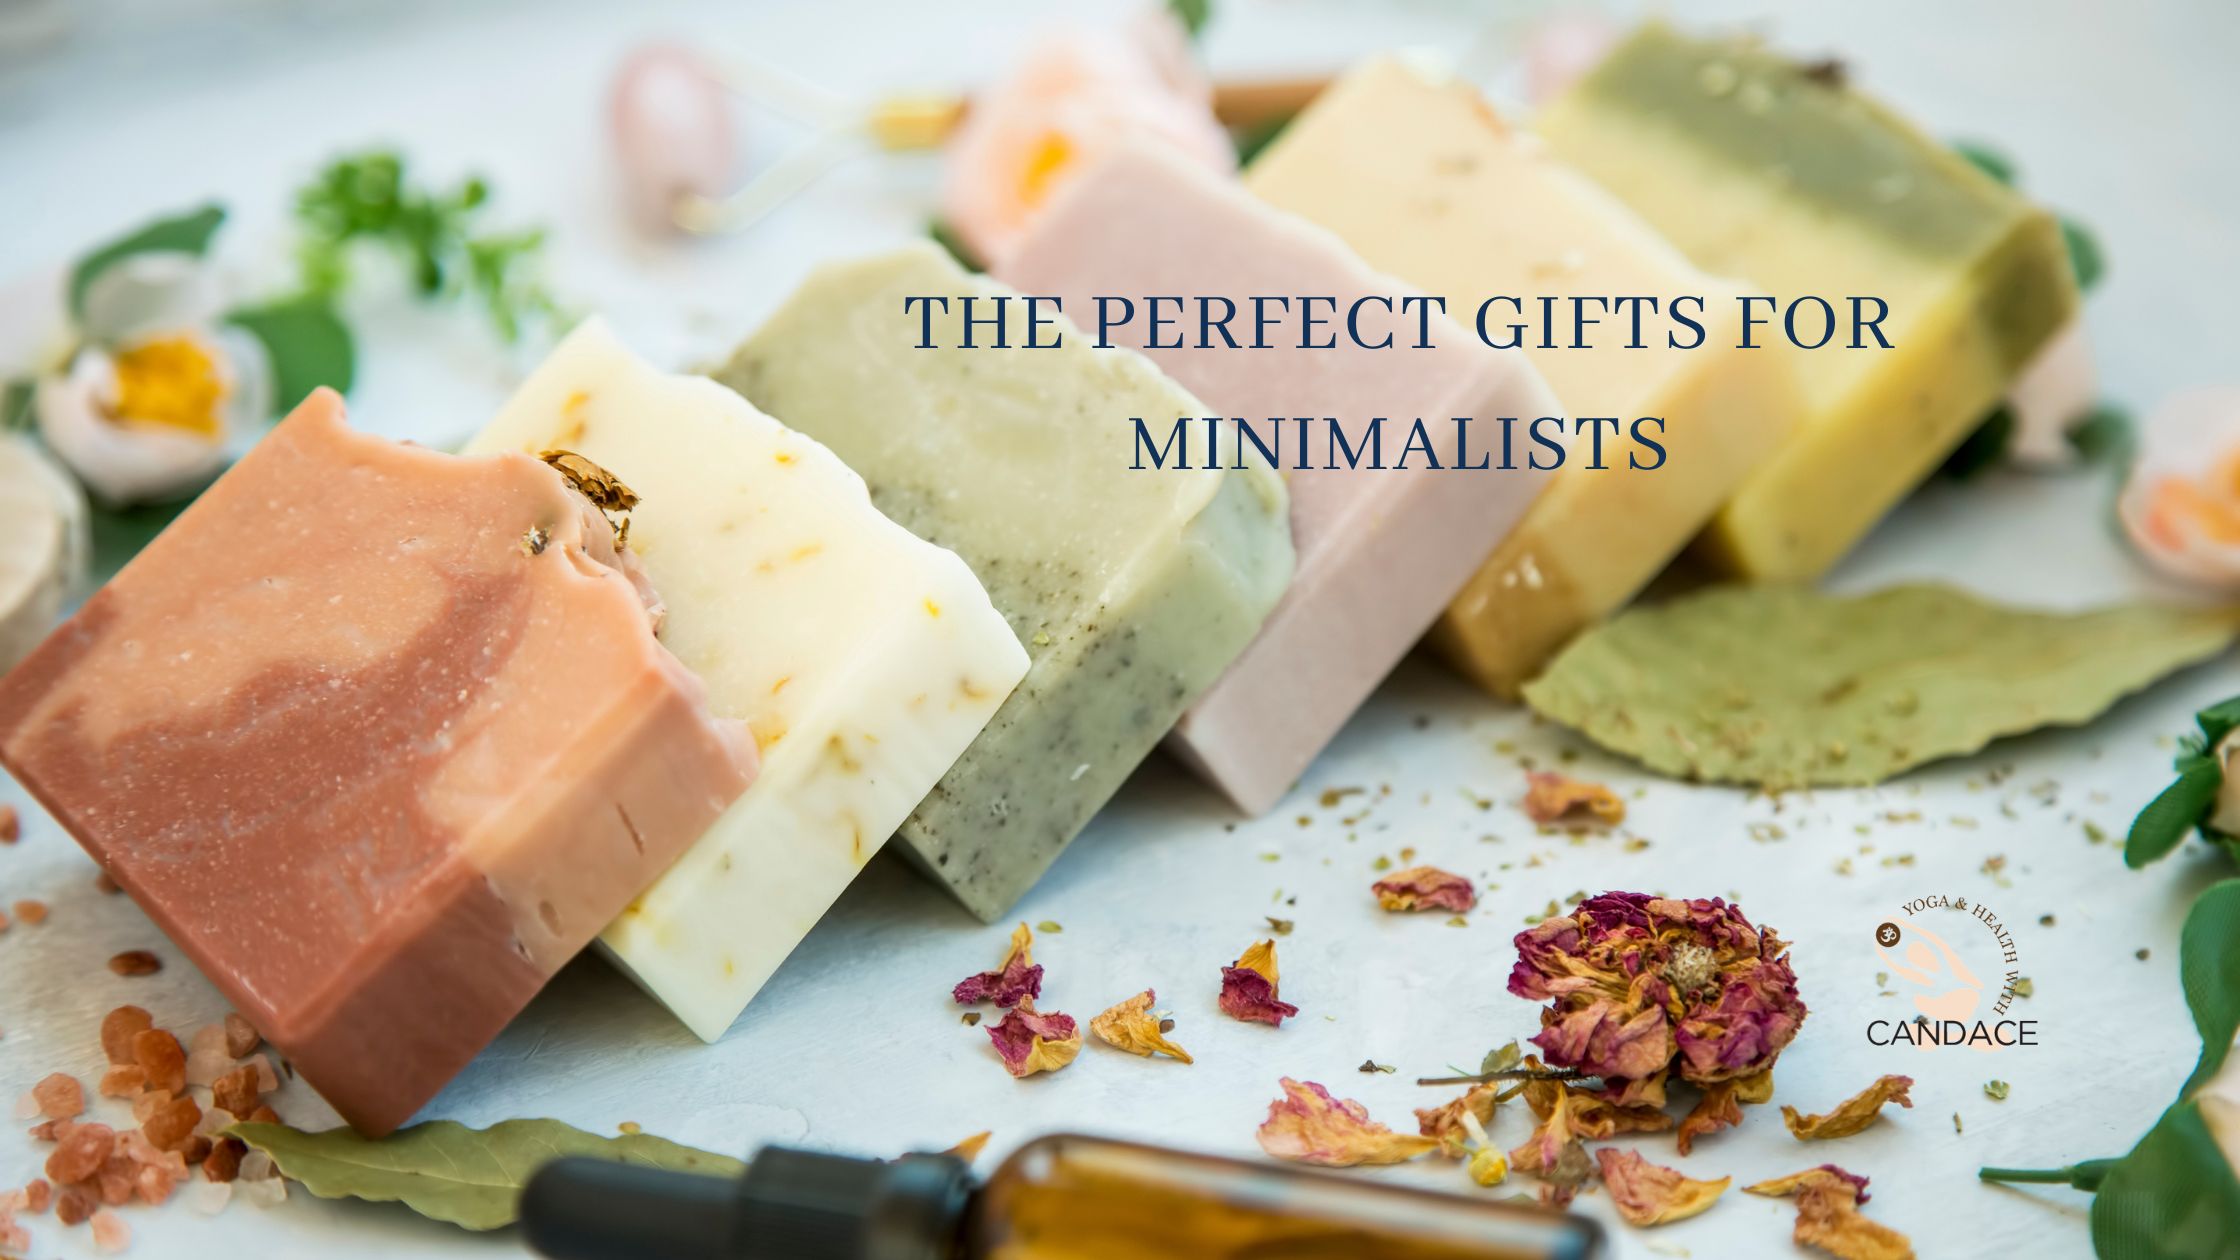 The Perfect Gifts for Minimalists - Yoga Health with Candace